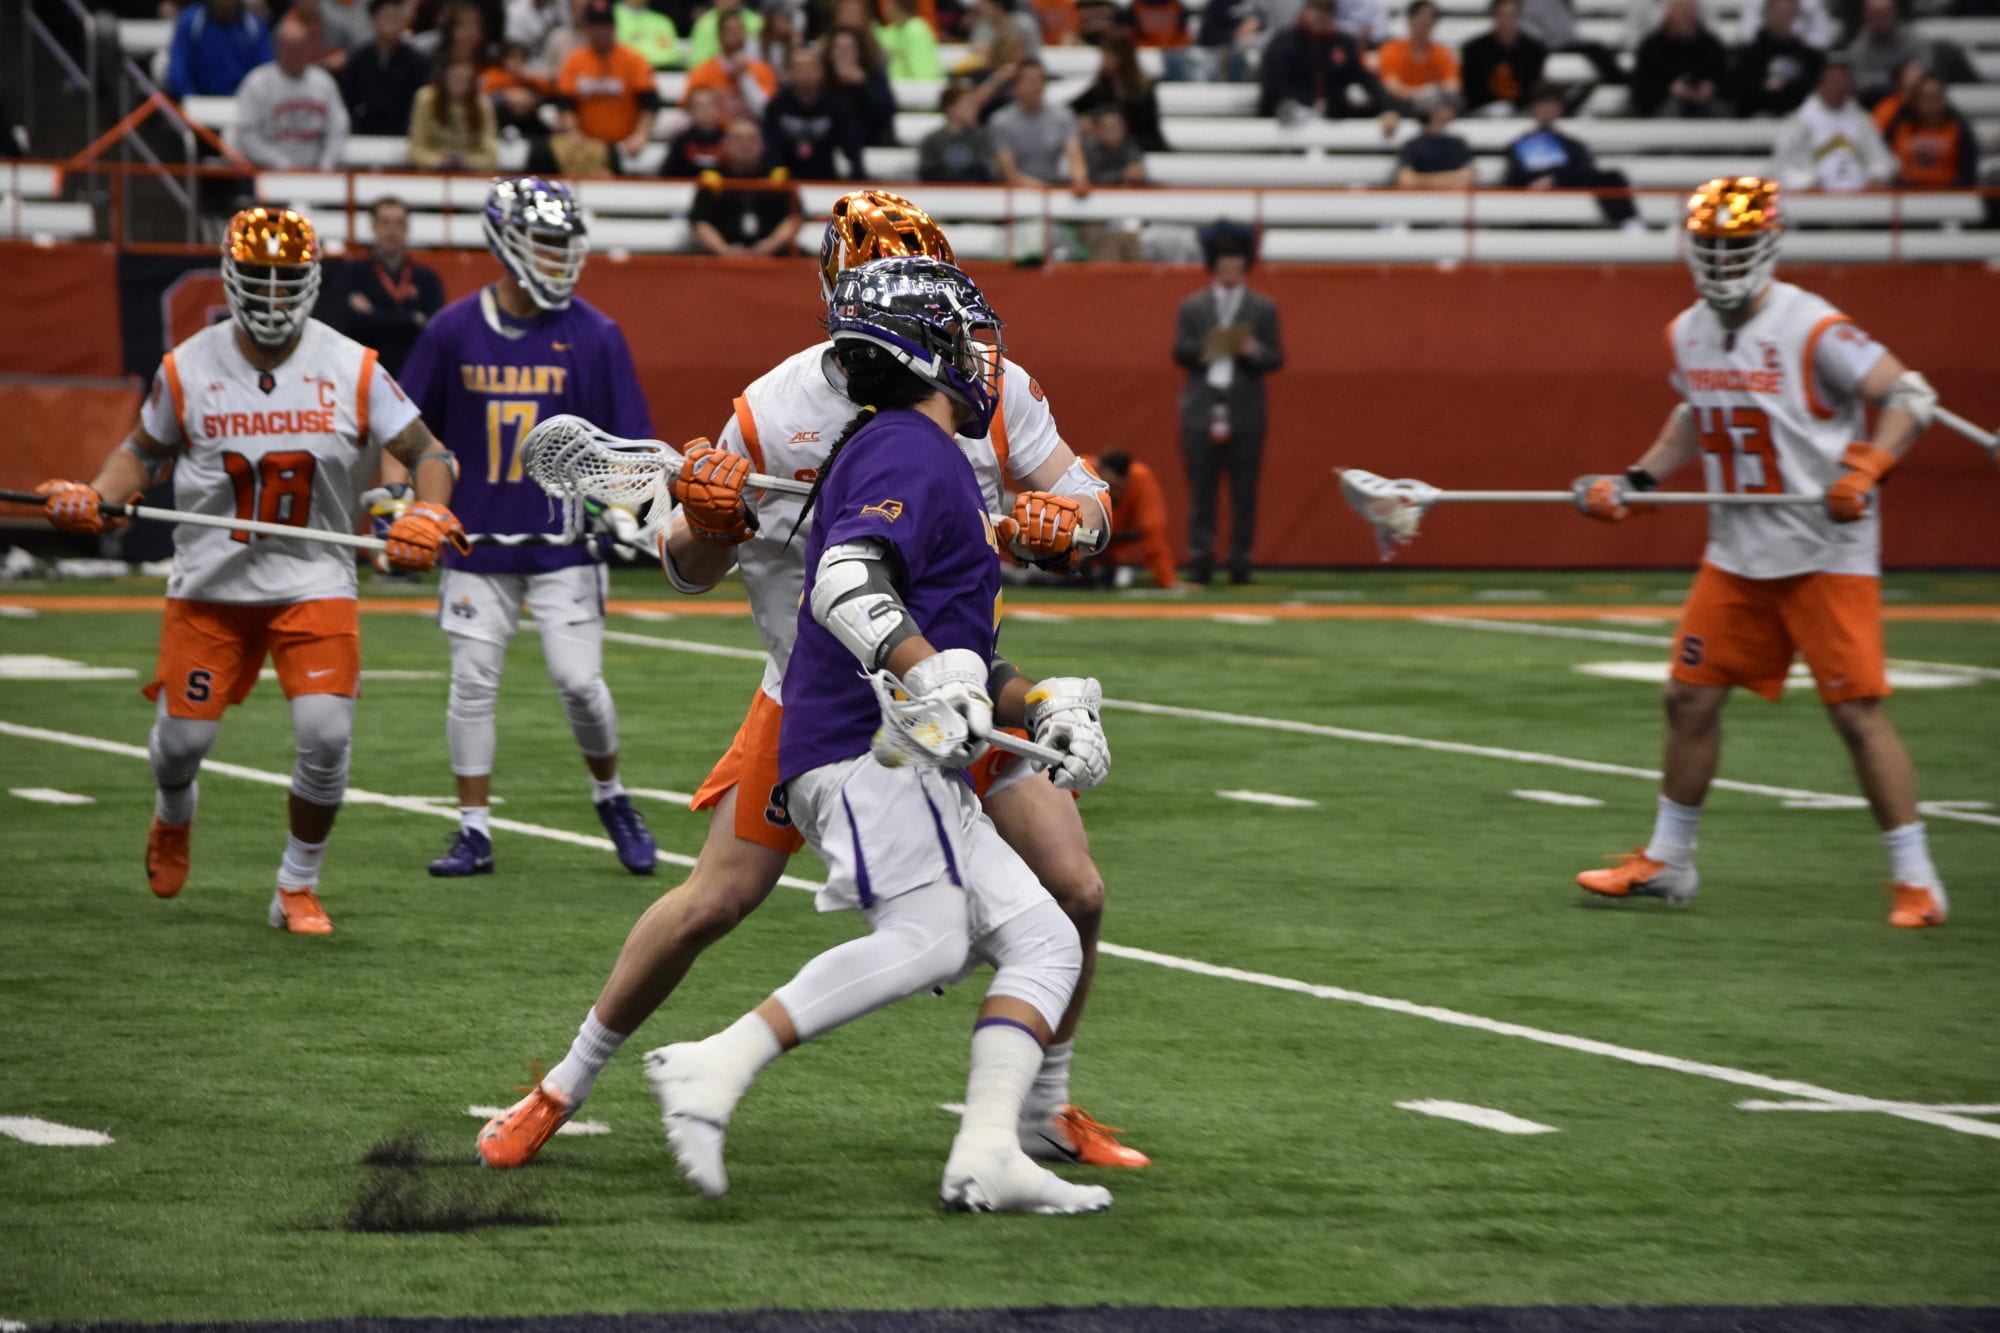 2020 NAIA Lacrosse Players Of The Week: March 9 - Lacrosse All Stars